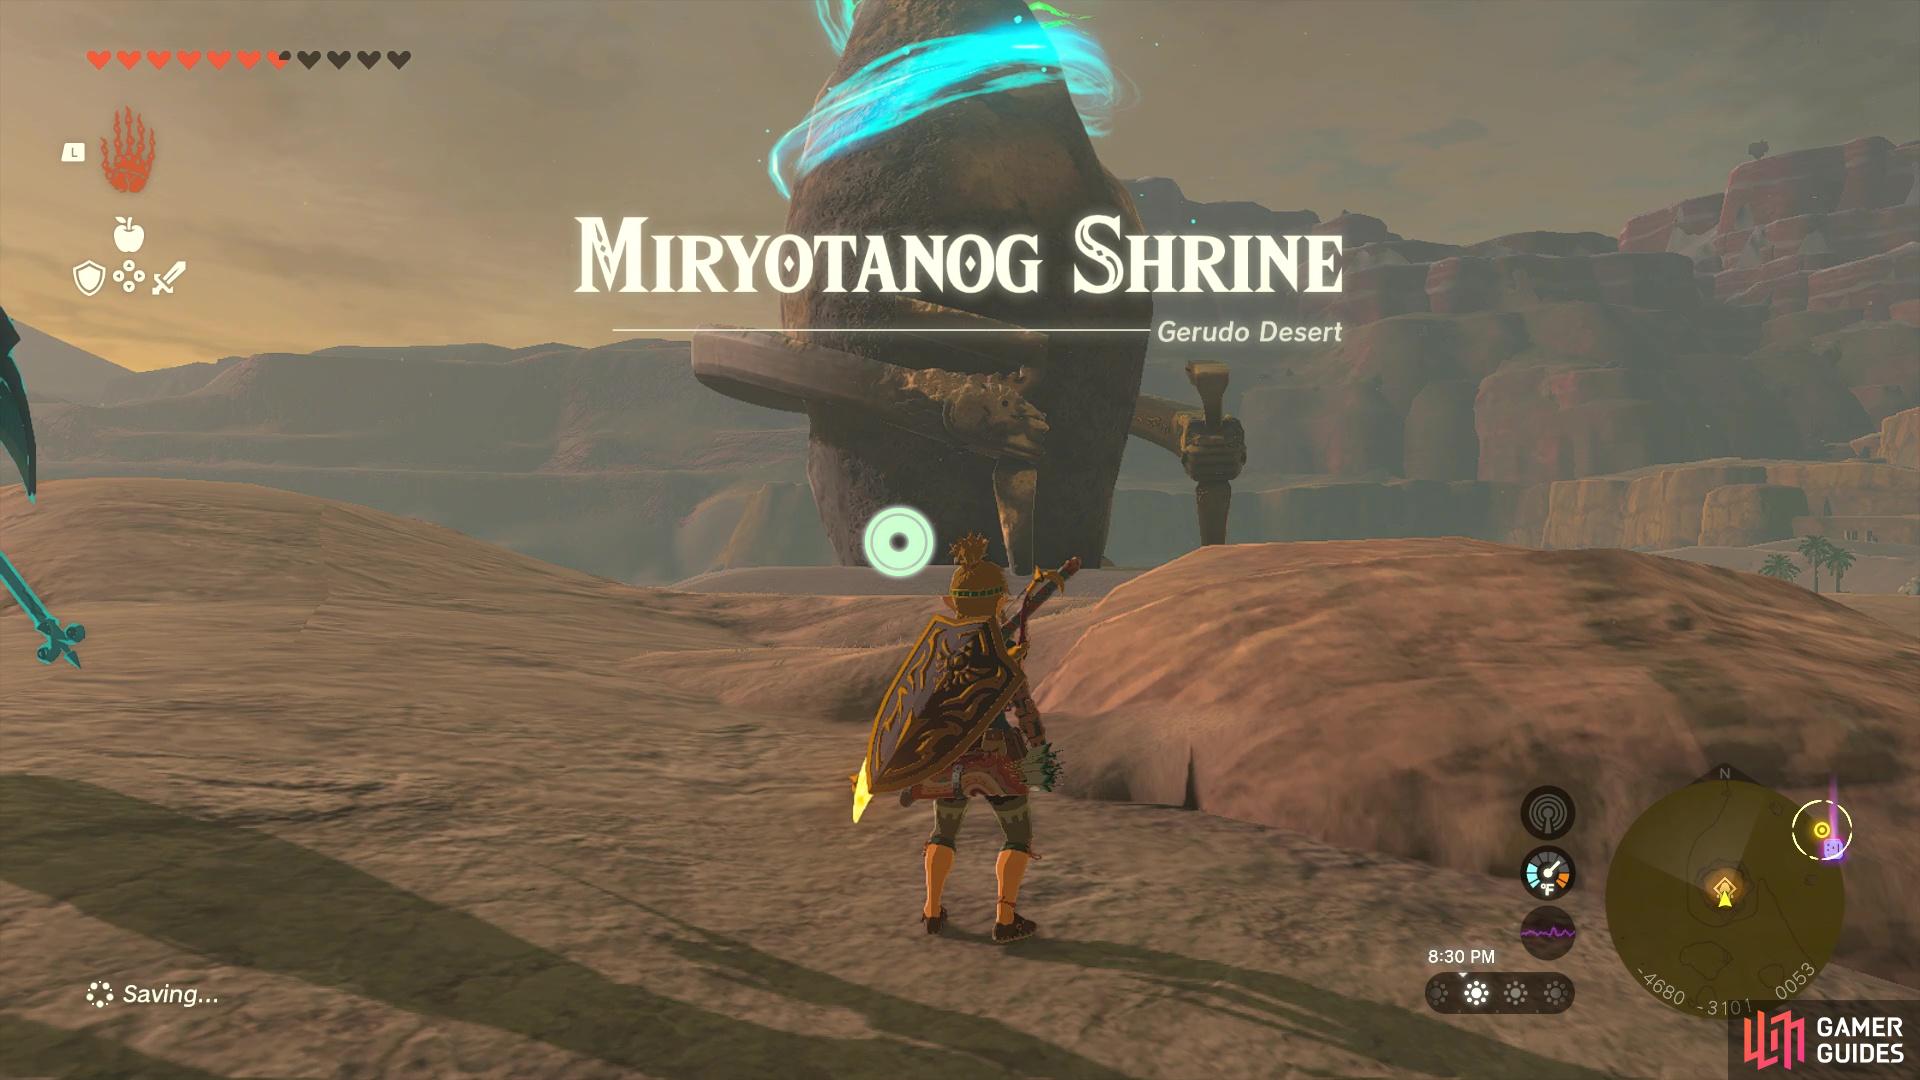 Miryotanog Shrine is found on a rock in the western part of the Gerudo Desert.